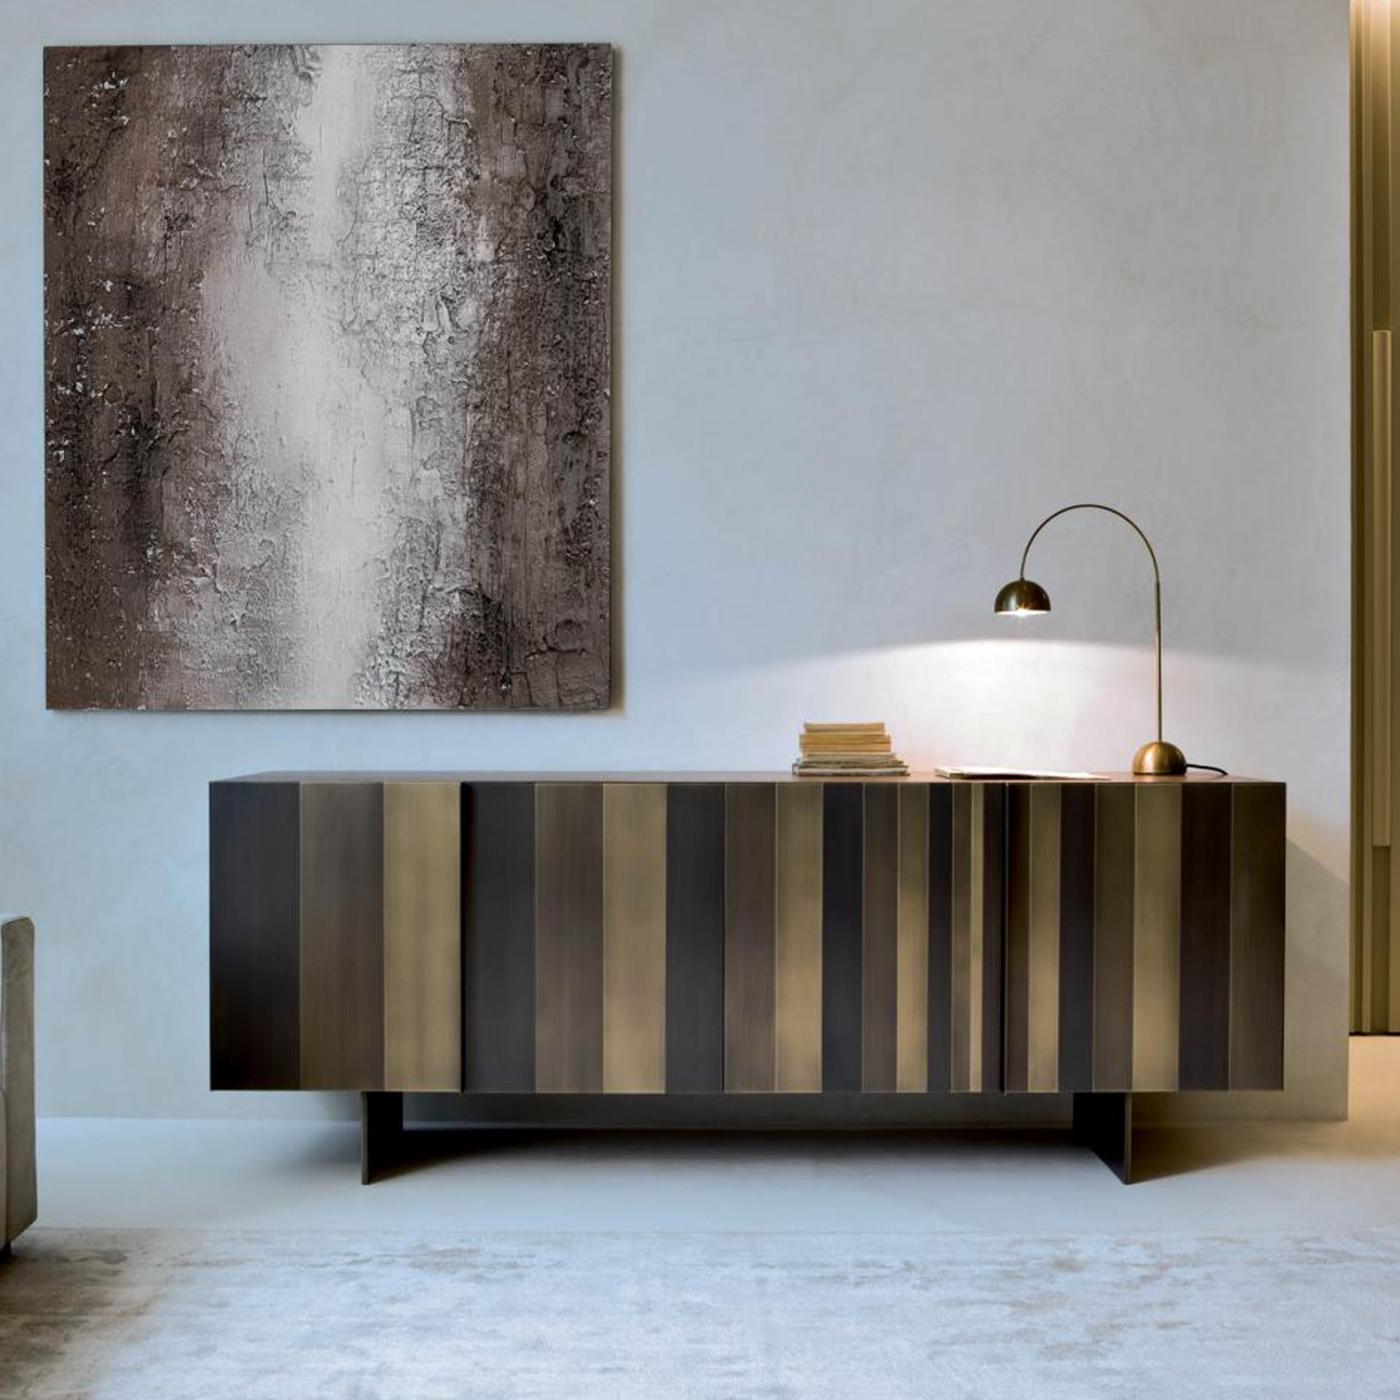 This horizontal sideboard sits atop thin yet sturdy legs and is equipped with four inner drawers. Its sides, doors and legs are covered in metal, while its interior and top have a walnut finish. Its top can also be covered in metal. The use of metal